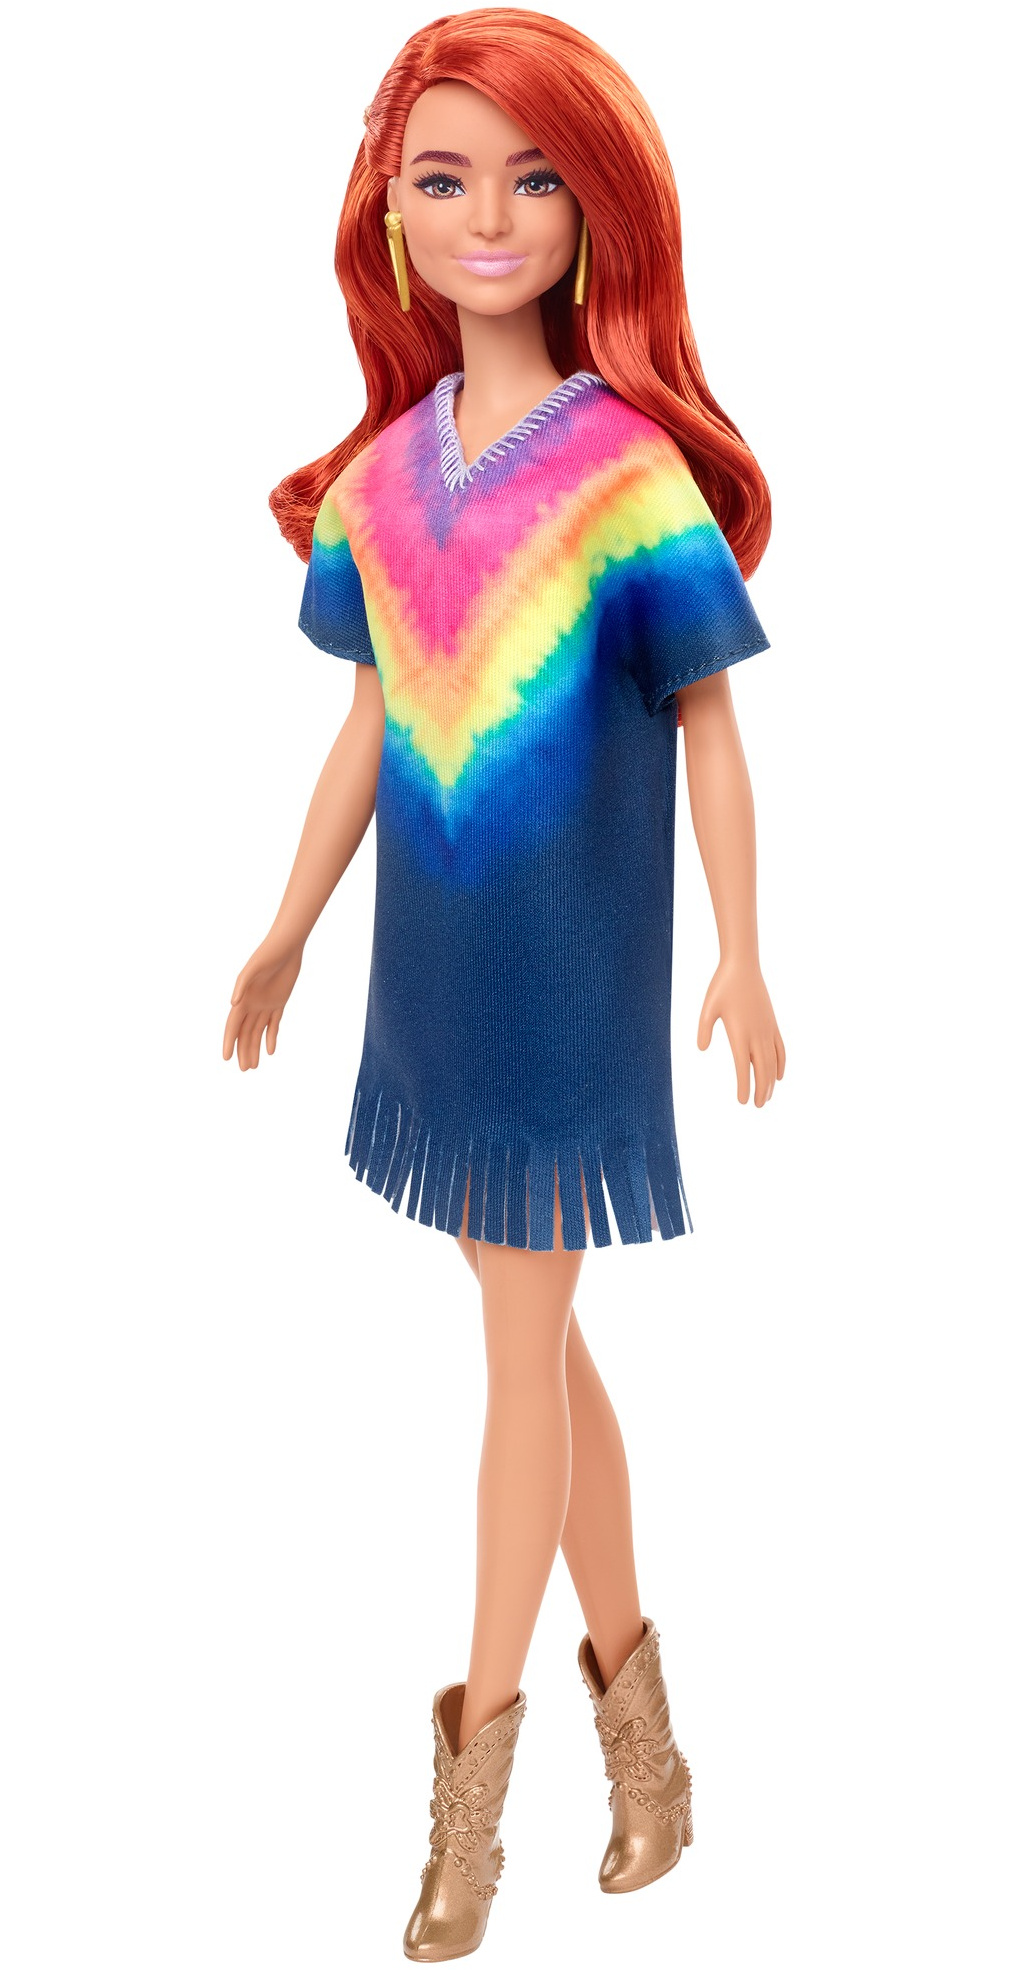 ​Barbie Fashionistas Doll 141 with Long Red Hair Wearing Tie-Dye Fringe Dress - image 1 of 7